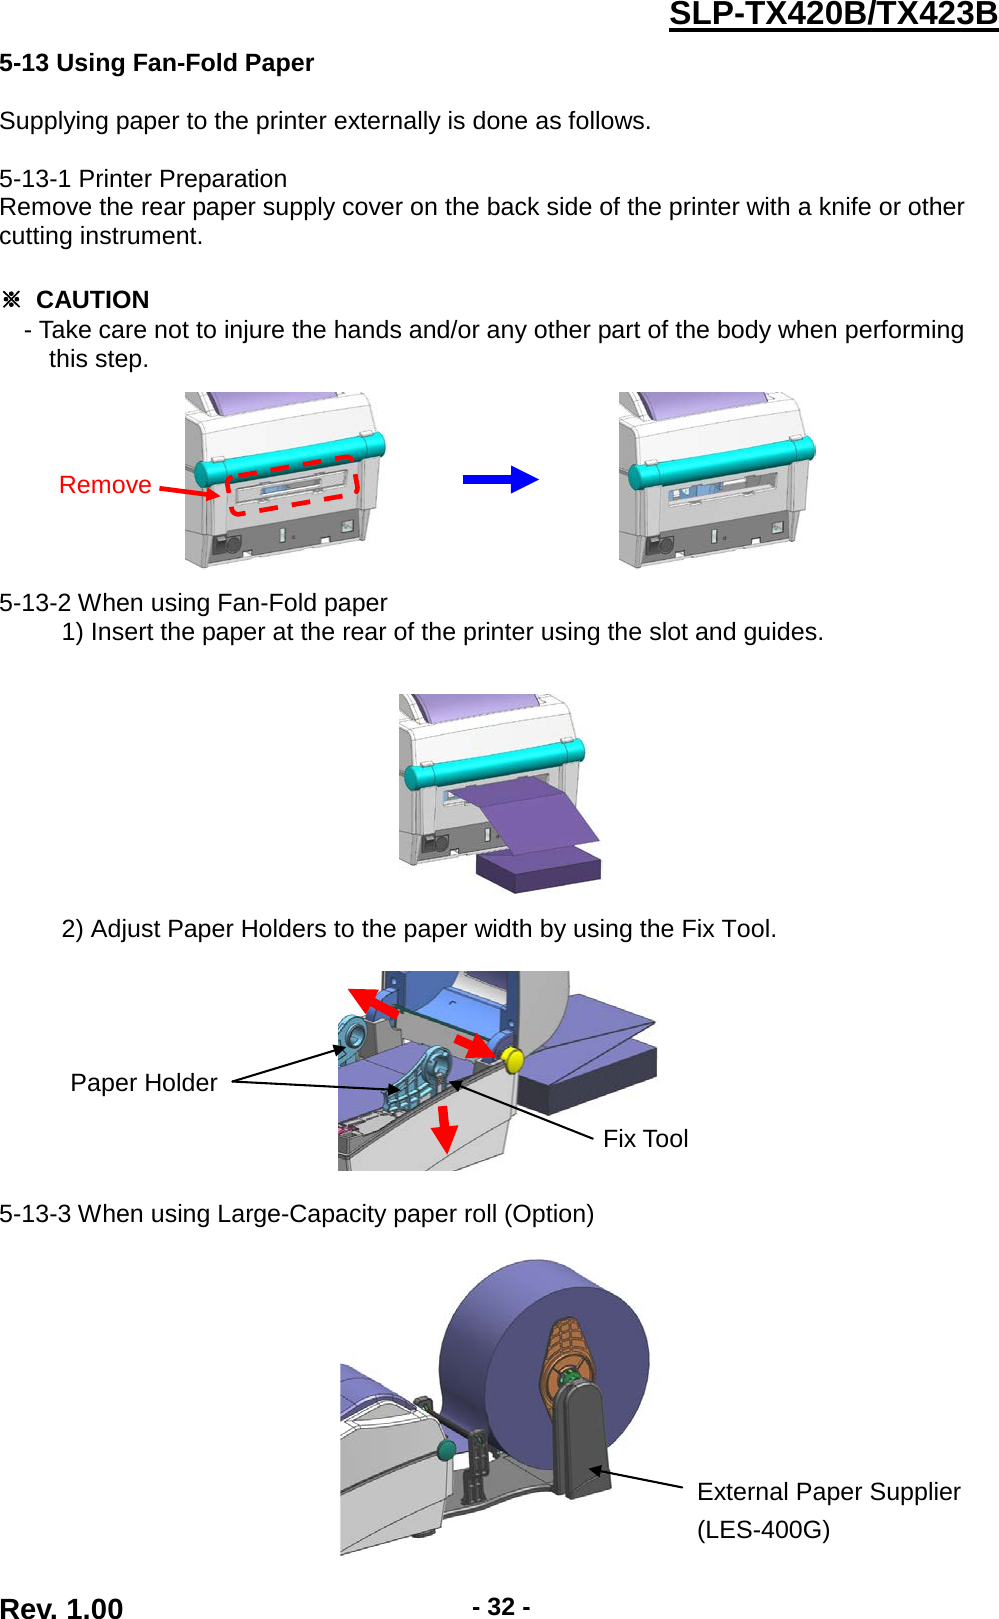  Rev. 1.00 - 32 - SLP-TX420B/TX423B 5-13 Using Fan-Fold Paper  Supplying paper to the printer externally is done as follows.  5-13-1 Printer Preparation Remove the rear paper supply cover on the back side of the printer with a knife or other cutting instrument.  ※ CAUTION - Take care not to injure the hands and/or any other part of the body when performing   this step.                              5-13-2 When using Fan-Fold paper      1) Insert the paper at the rear of the printer using the slot and guides.          2) Adjust Paper Holders to the paper width by using the Fix Tool.      5-13-3 When using Large-Capacity paper roll (Option)   Remove Fix Tool  Paper Holder  External Paper Supplier (LES-400G) 